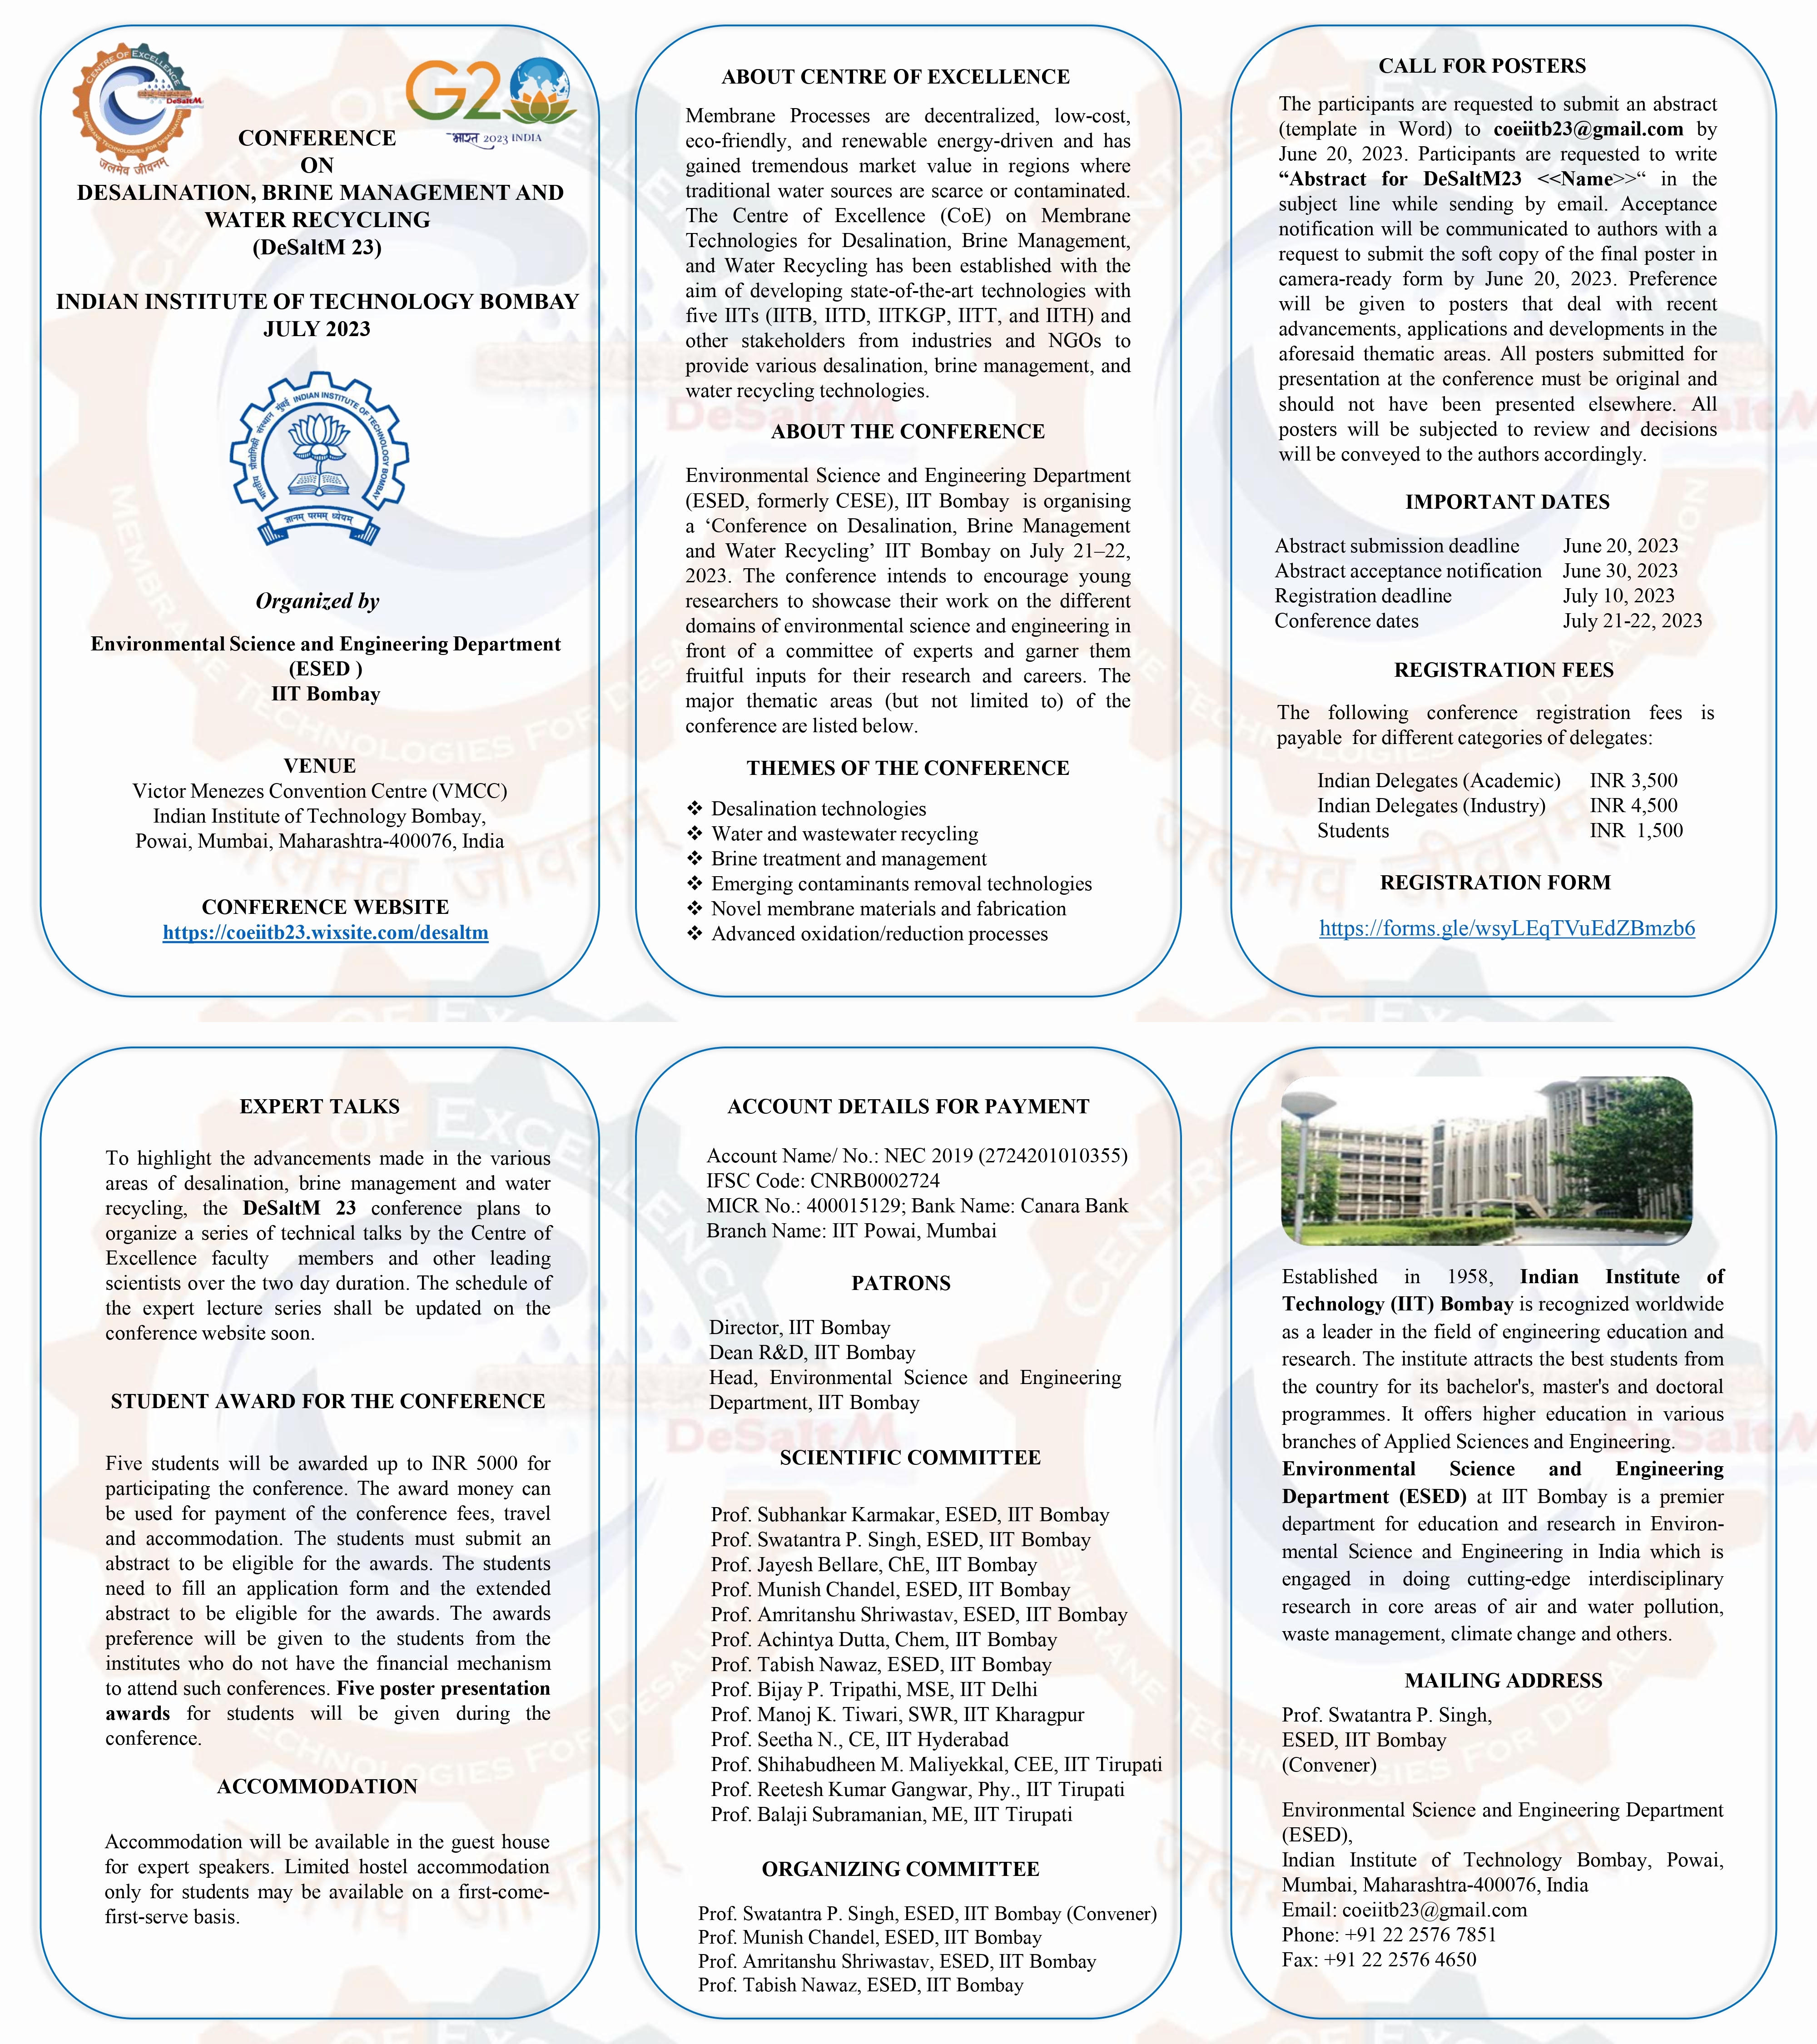 Conference on Desalination, Brine Management and Water Recycling at IIT Bombay, India, 21 - 22 July, 2023